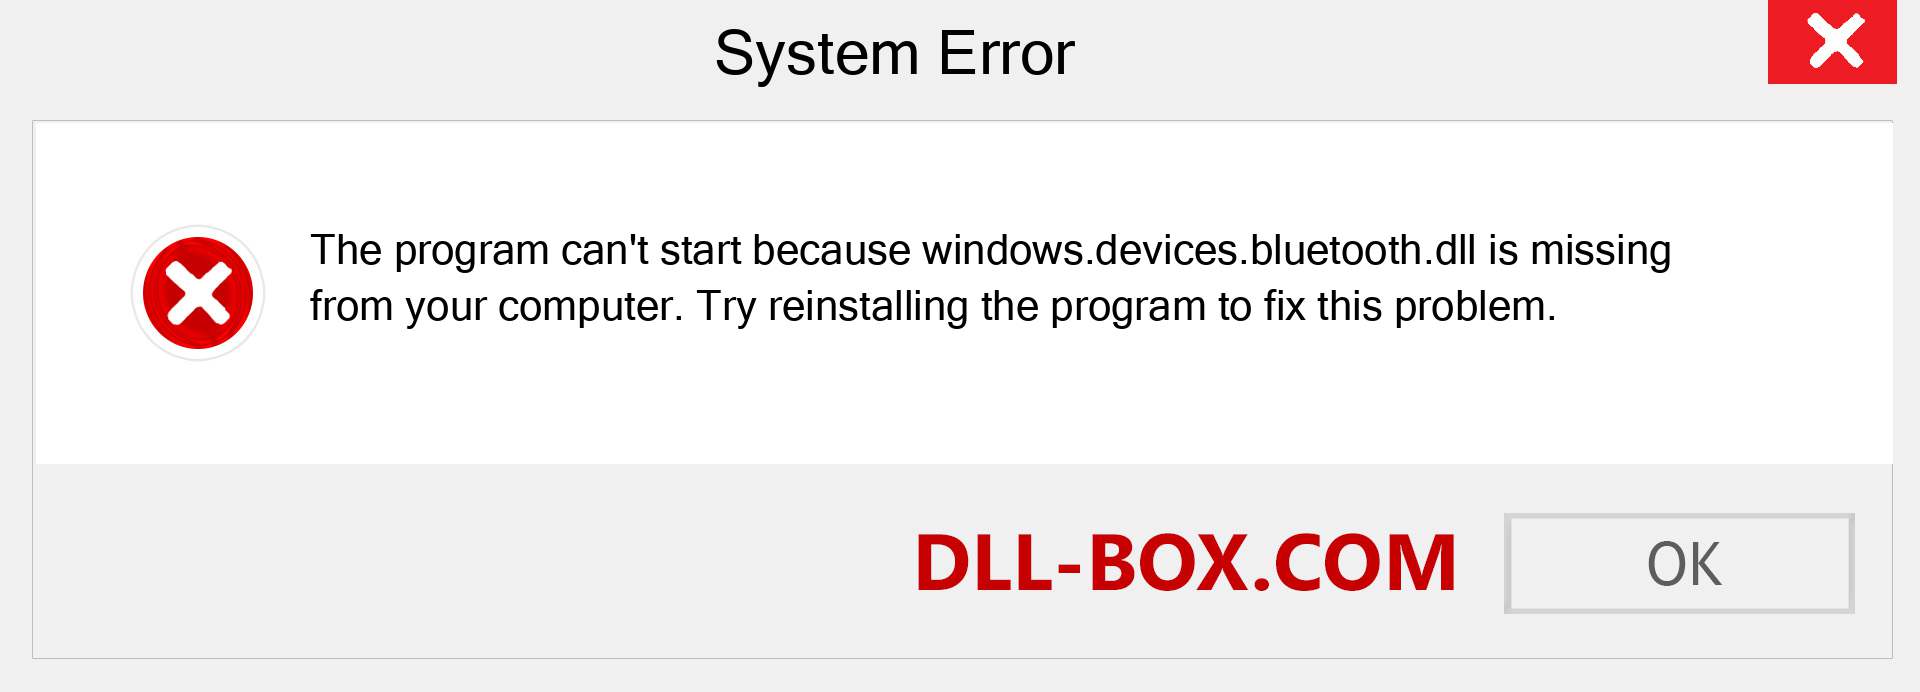  windows.devices.bluetooth.dll file is missing?. Download for Windows 7, 8, 10 - Fix  windows.devices.bluetooth dll Missing Error on Windows, photos, images